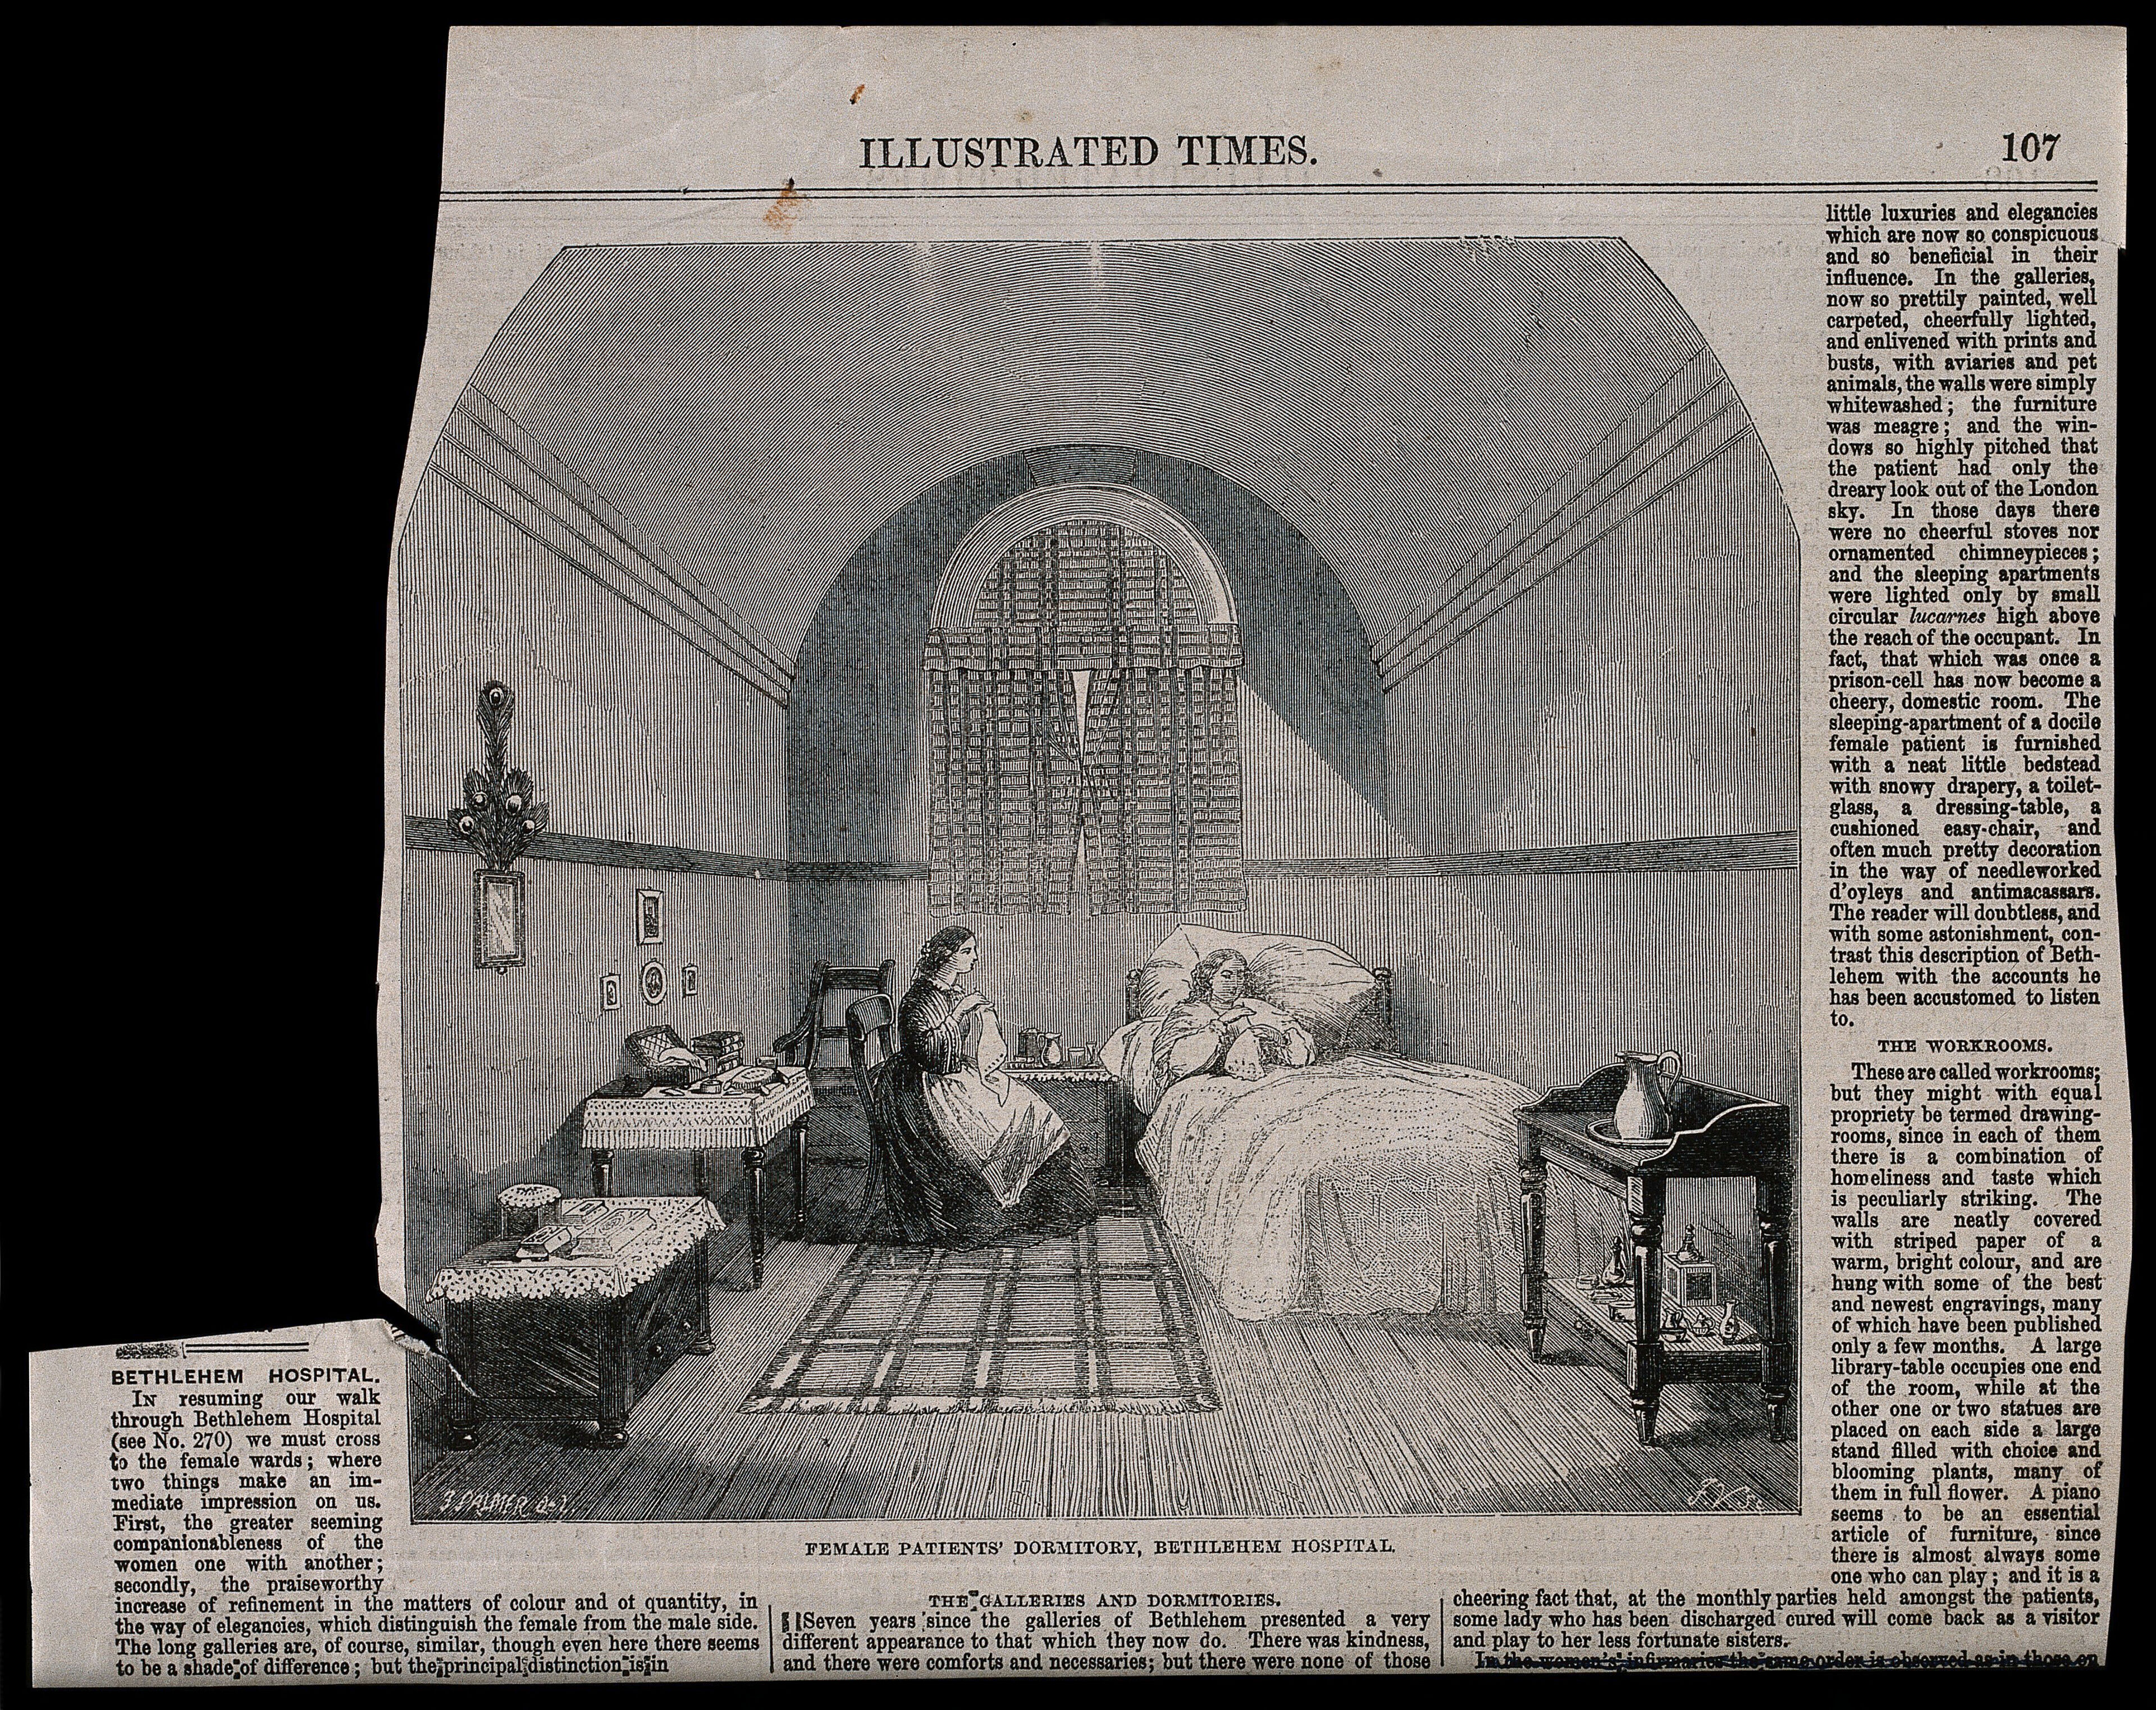 The Hospital of Bethlem [Bedlam], St. George's Fields, Lambeth: a female dormitory. Wood engraving by F. Vizetelly after F. Palmer, 1860.